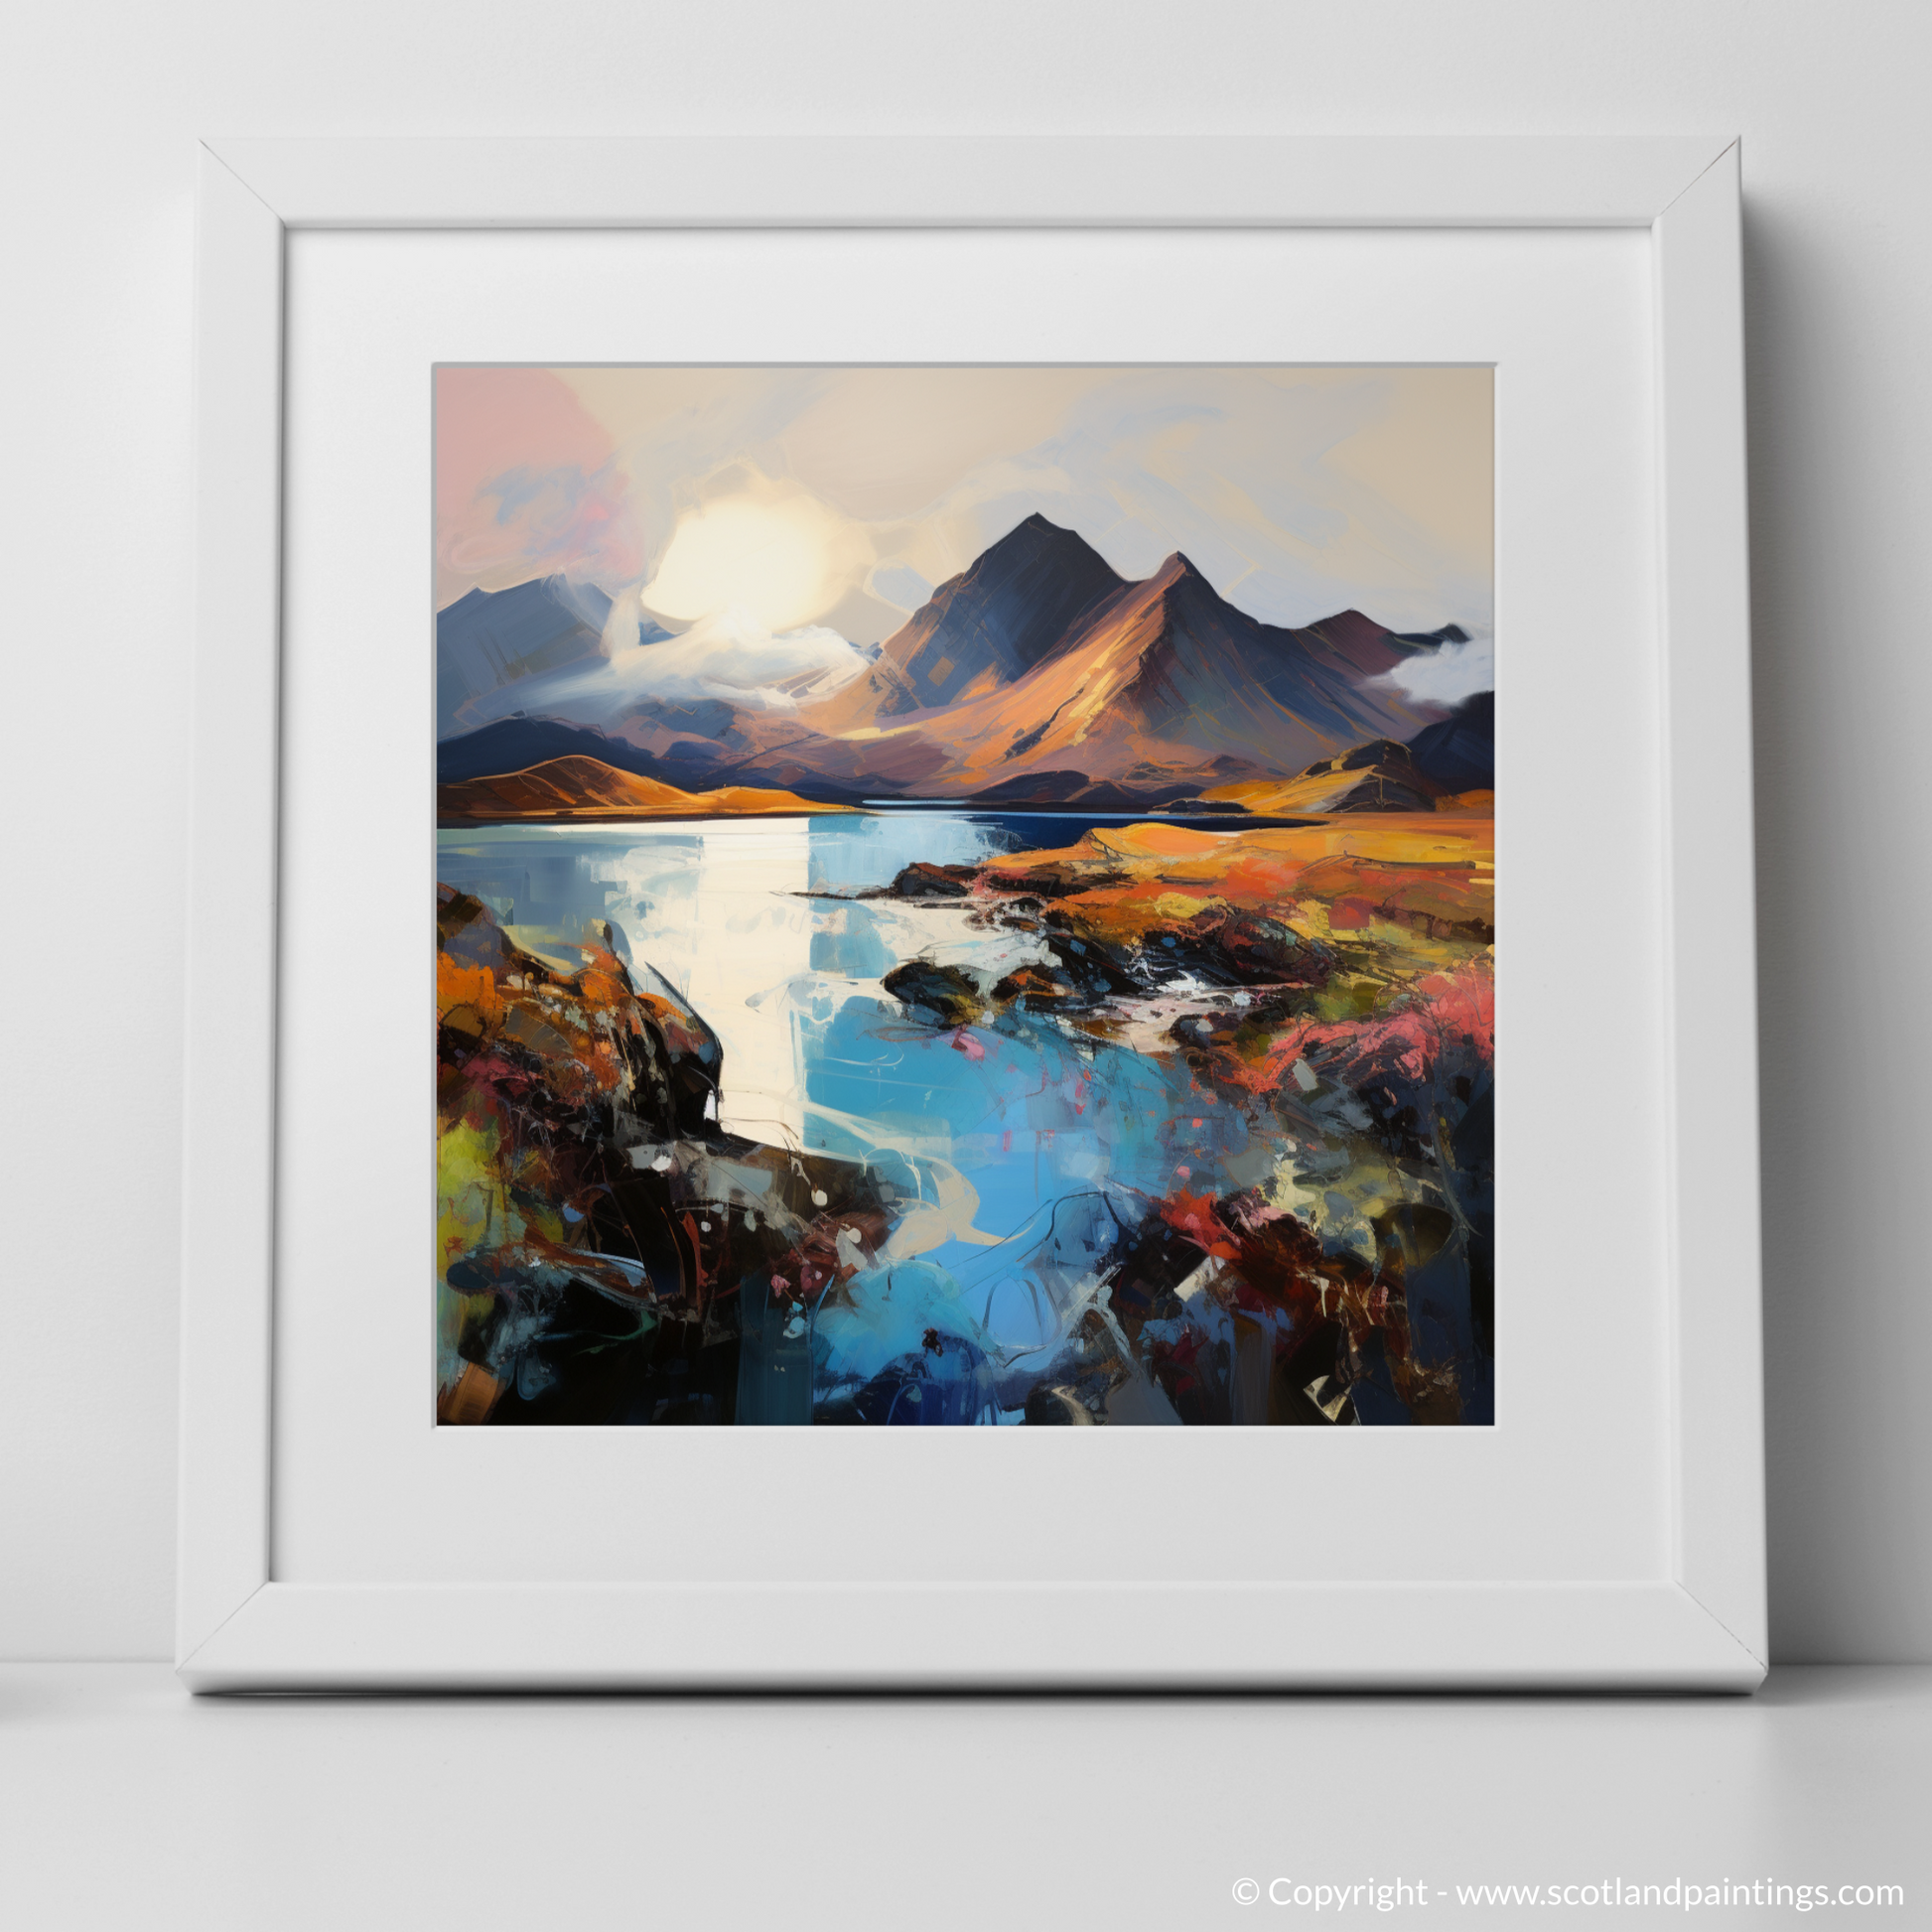 Art Print of The Cuillin, Isle of Skye with a white frame